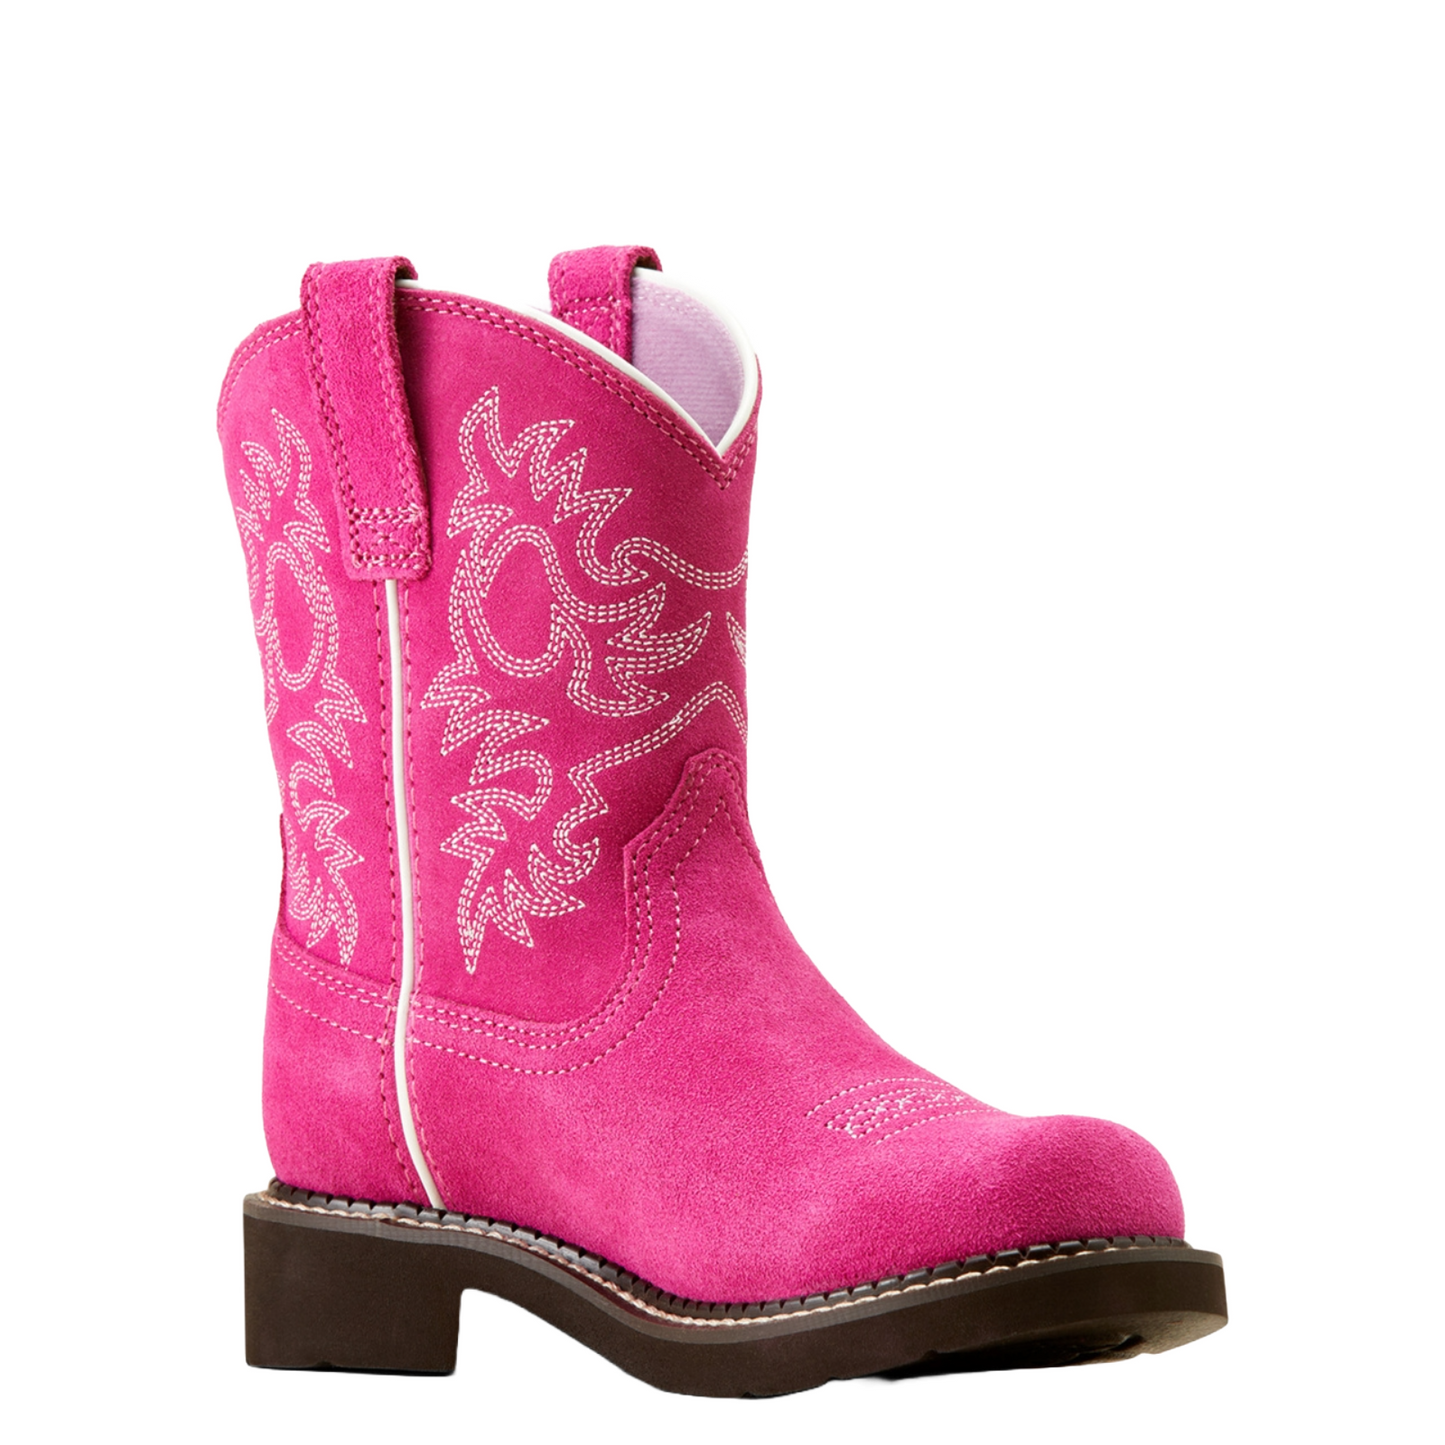 Ariat Youth Fatbaby Hottest Pink Western Boots 10051009